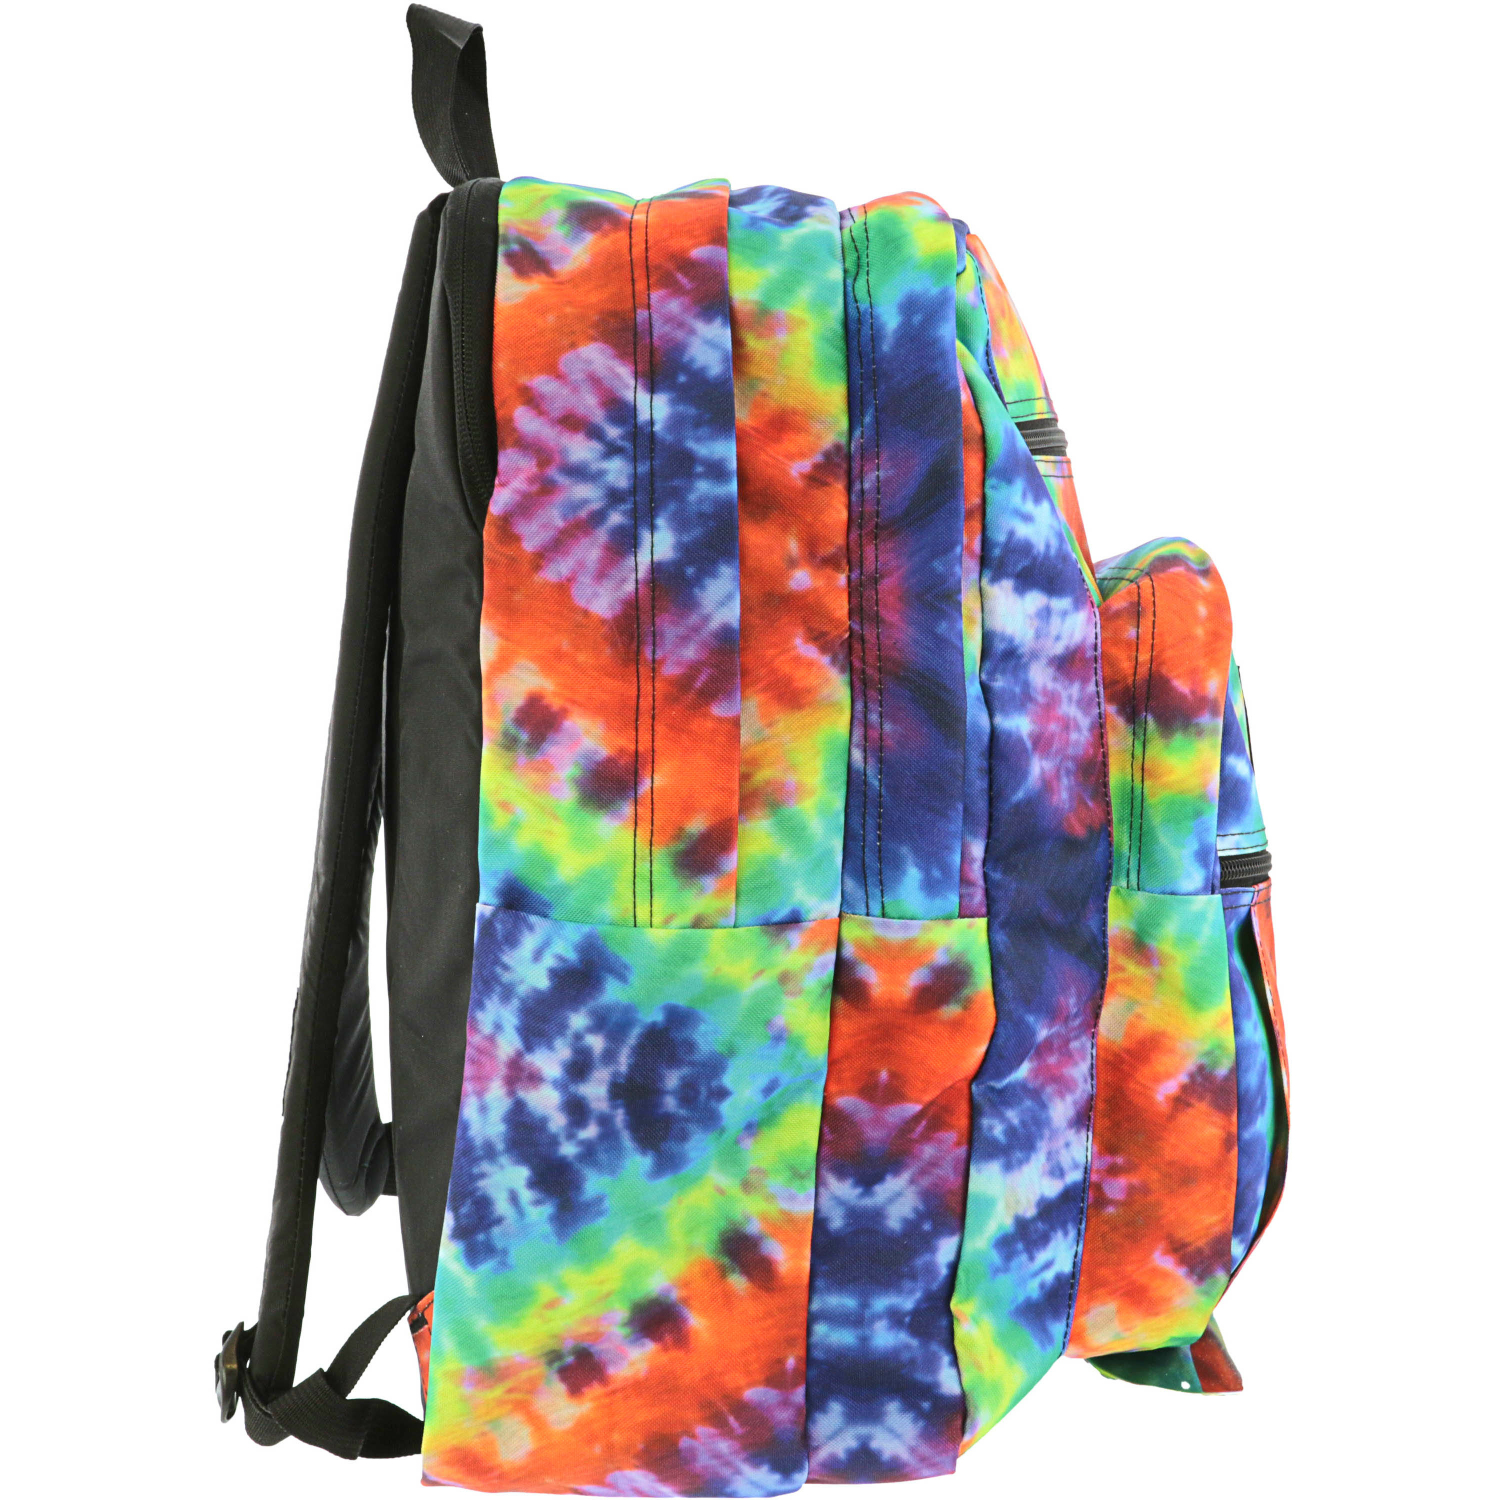 Jansport Big Student Polyester Backpack - Hippie Days Tie Dye - image 2 of 3